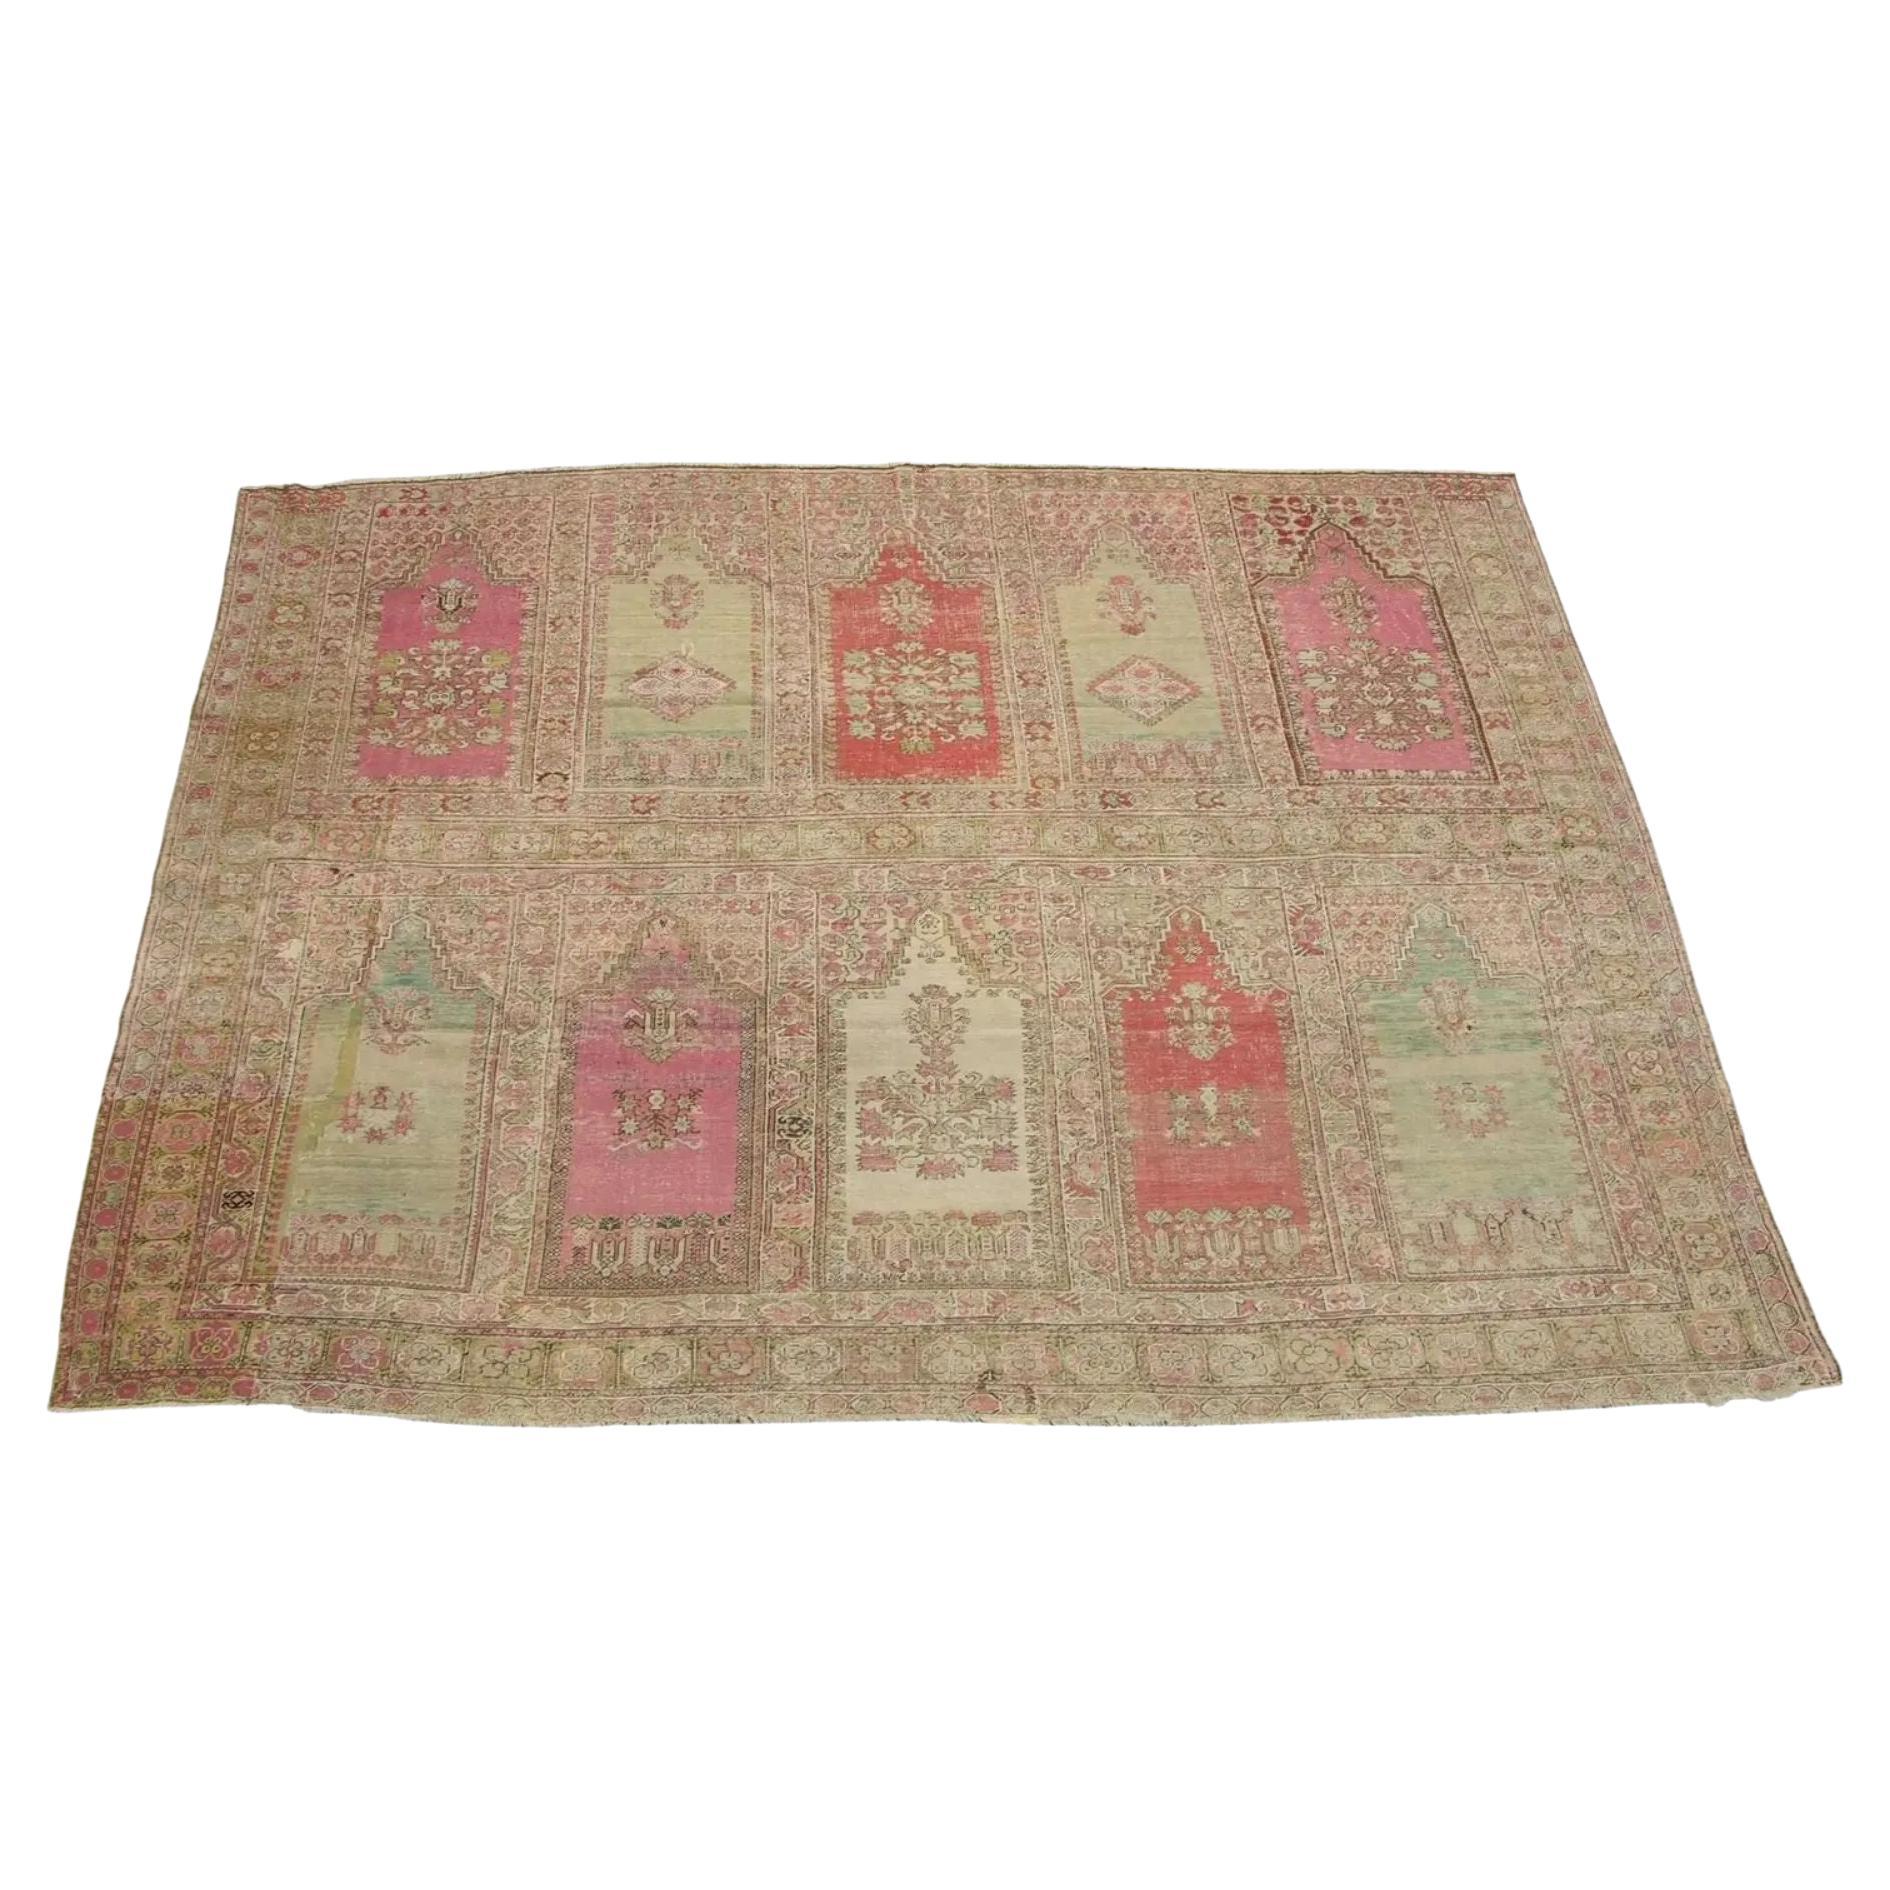 1850s Antique Turkish Family Prayer Rug 10'5''x8'1'' For Sale